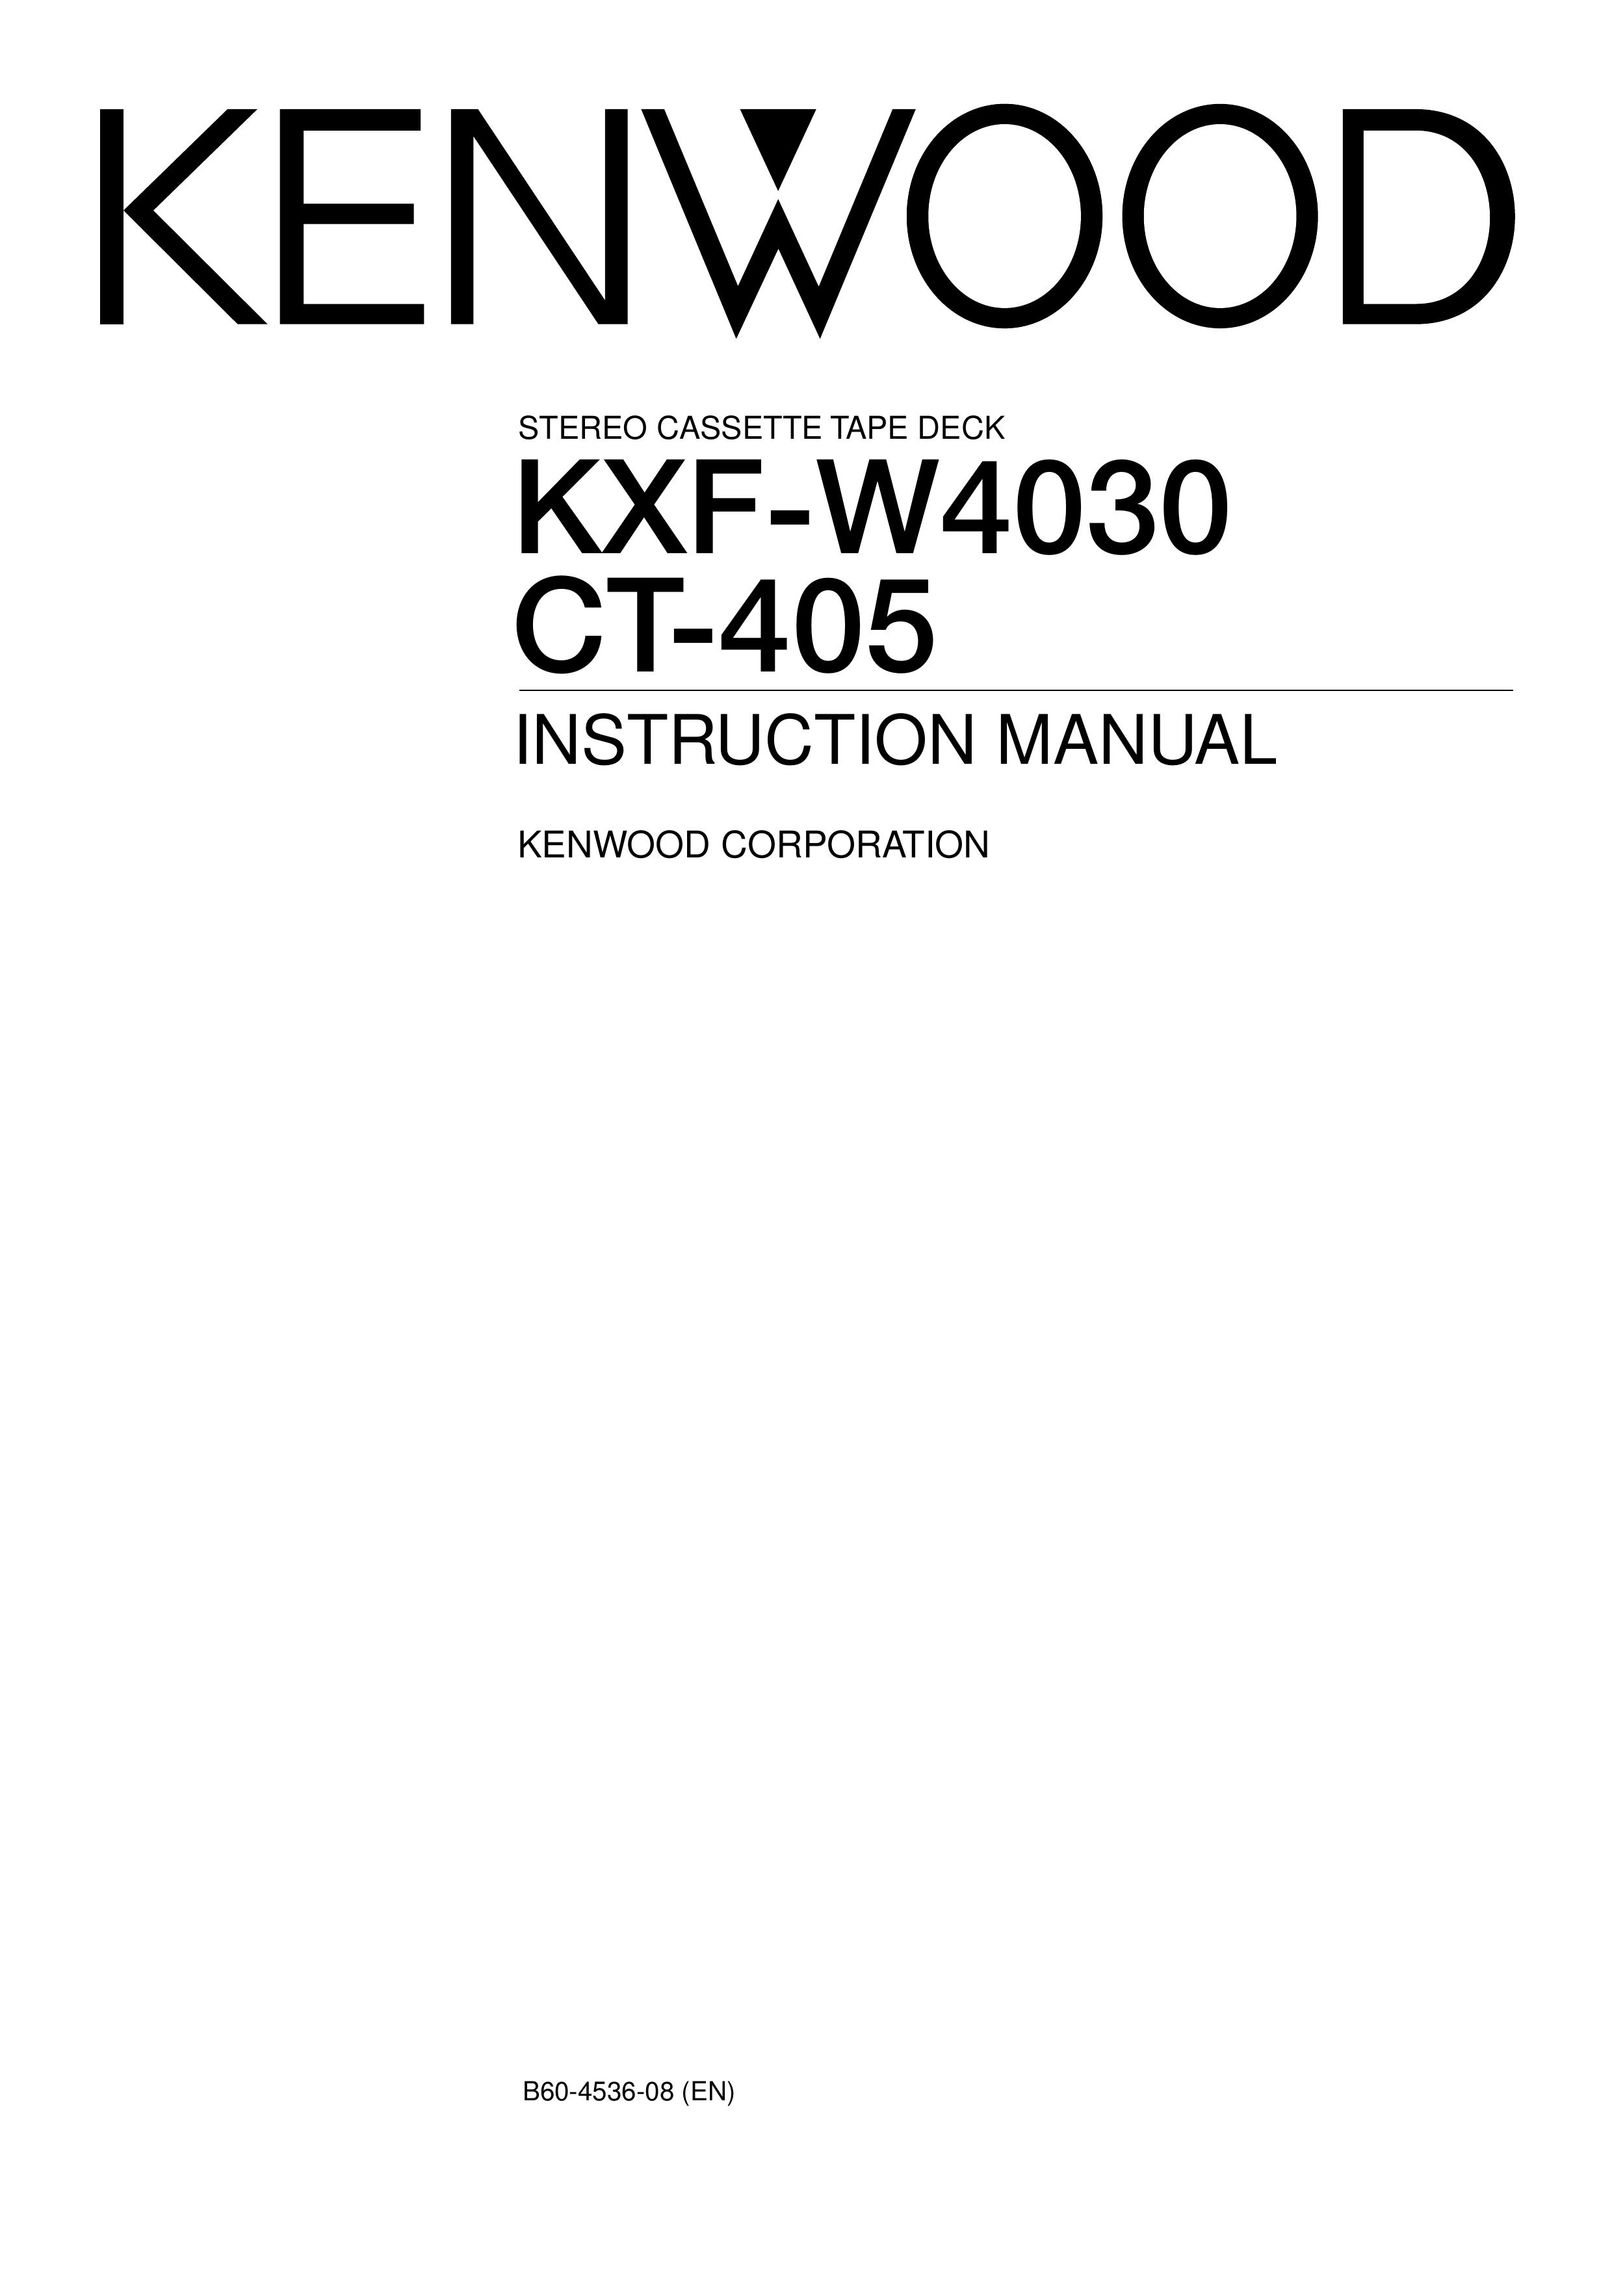 Kenwood CT-405 Stereo System User Manual